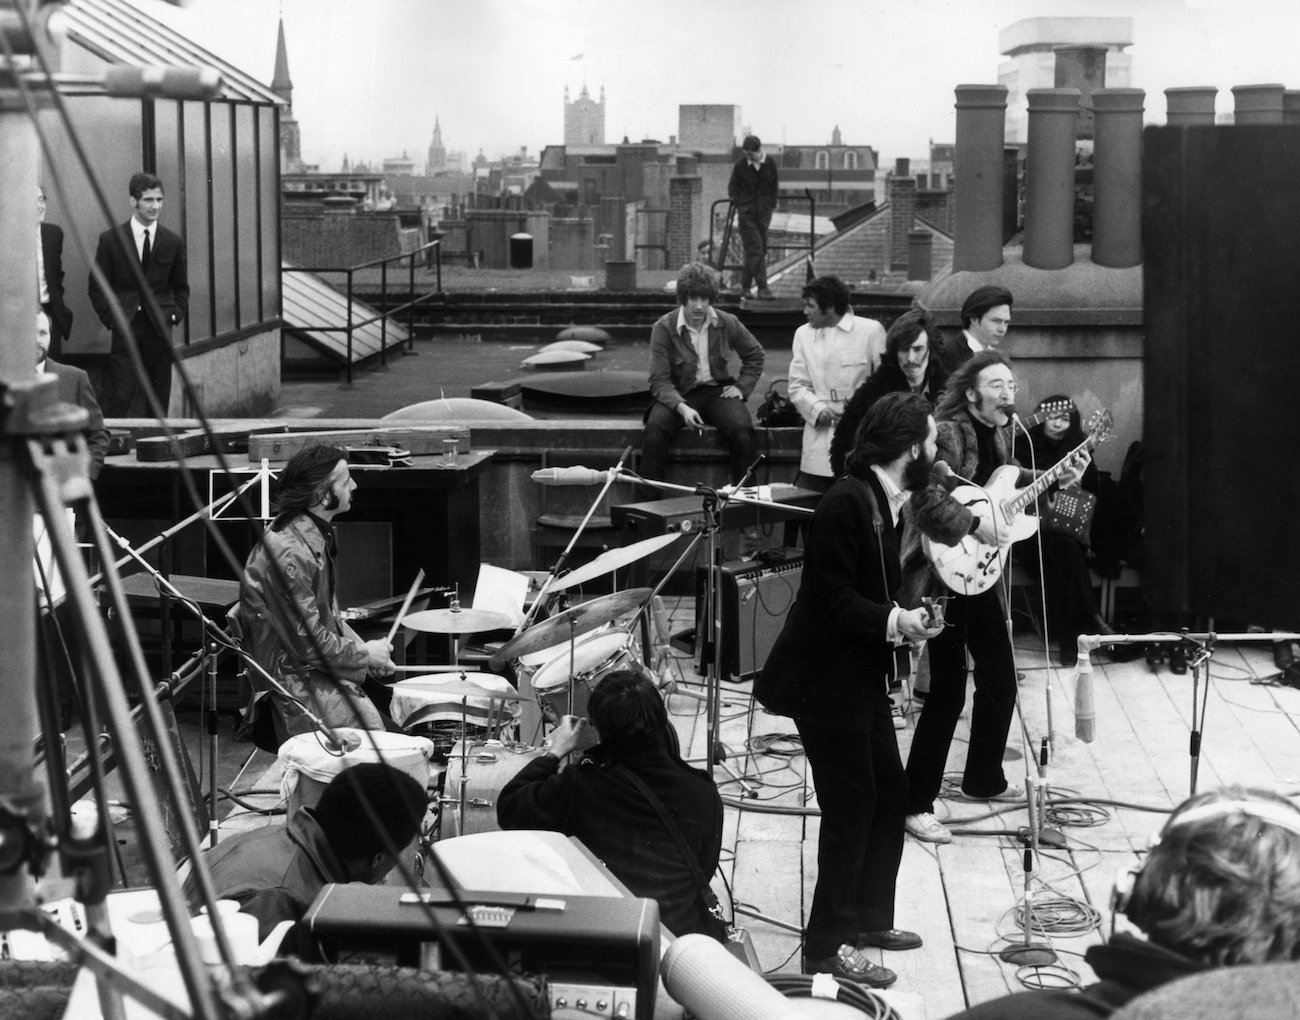 The Beatles performing during their rooftop concert in 1969. 